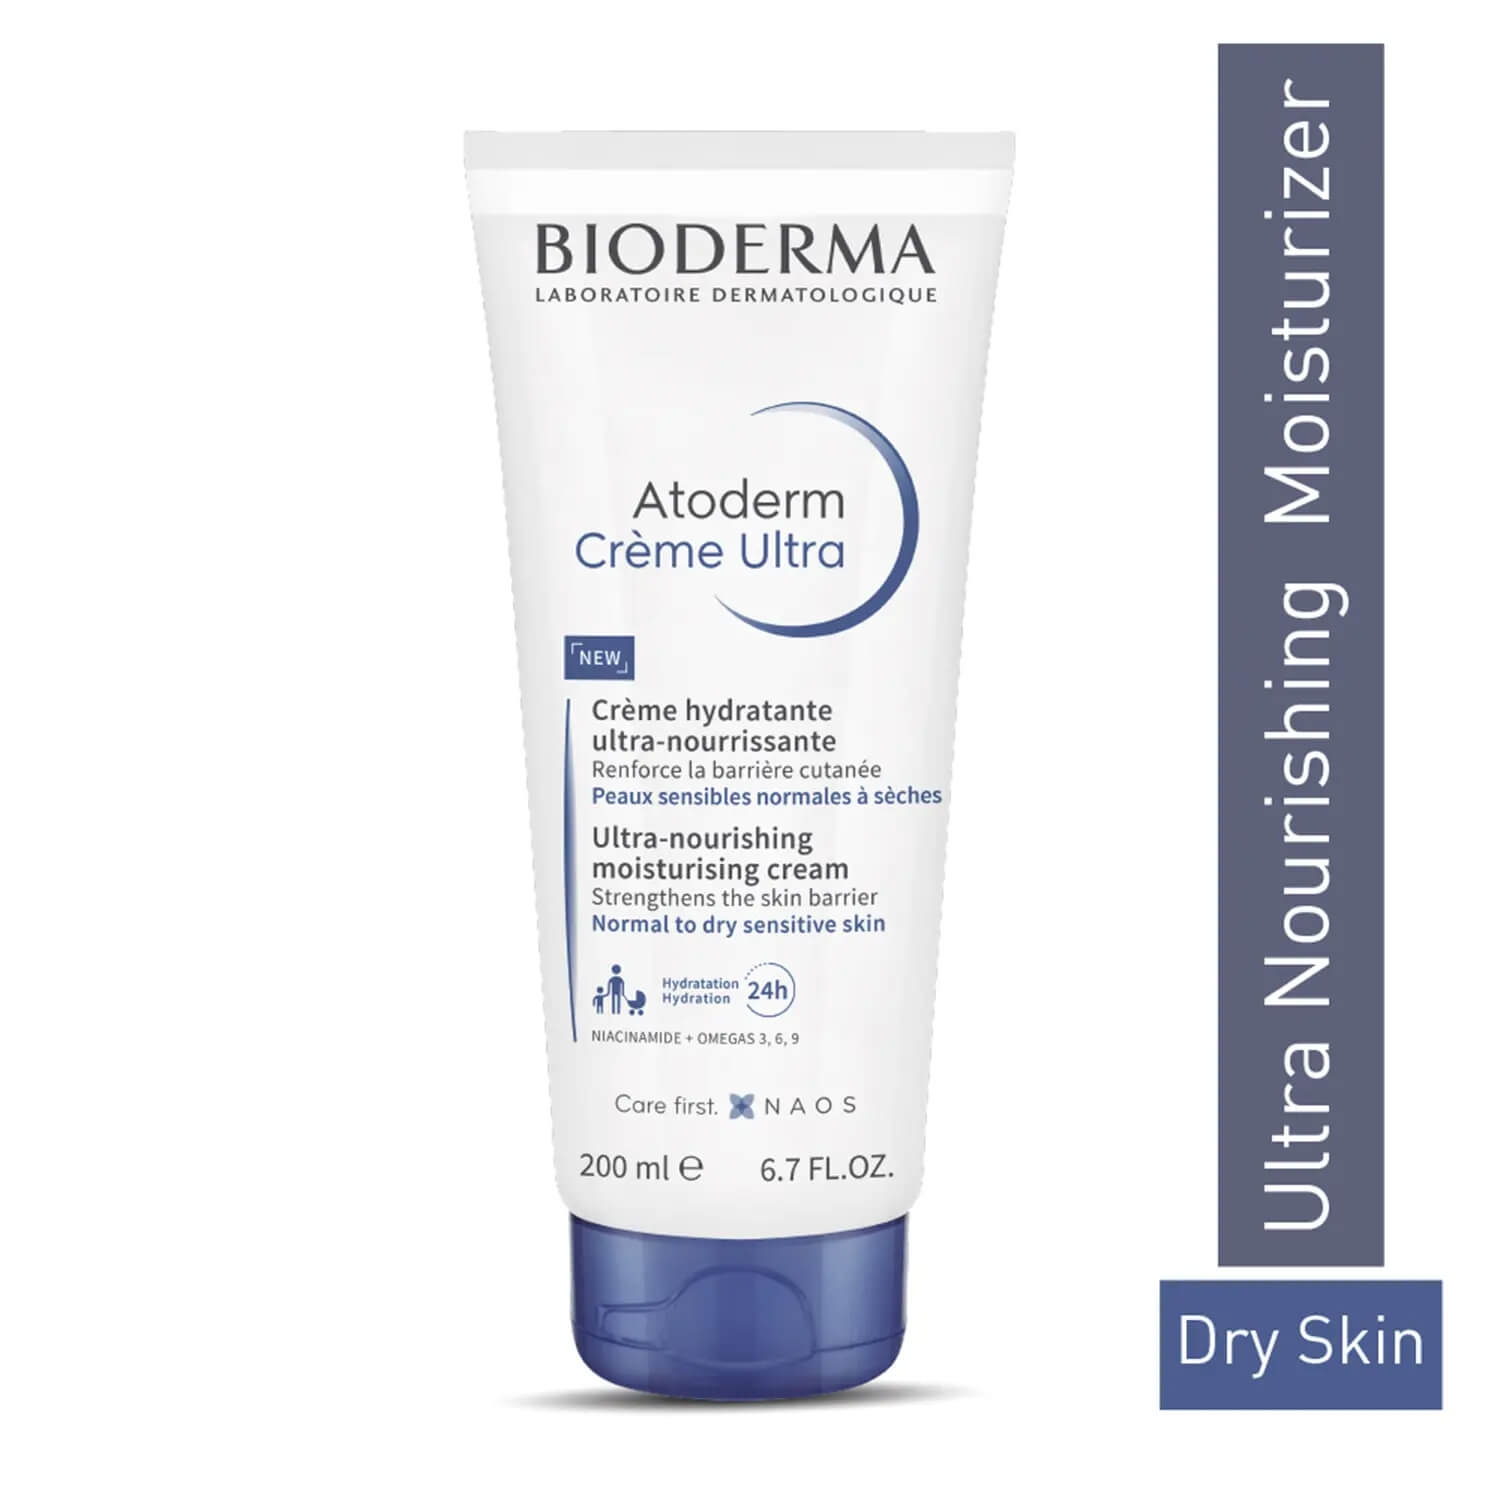 Bioderma | Bioderma Atoderm Creme Ultra Daily Hydrating Moisturizer for Normal To Sensitive Dry Skin, 200ml